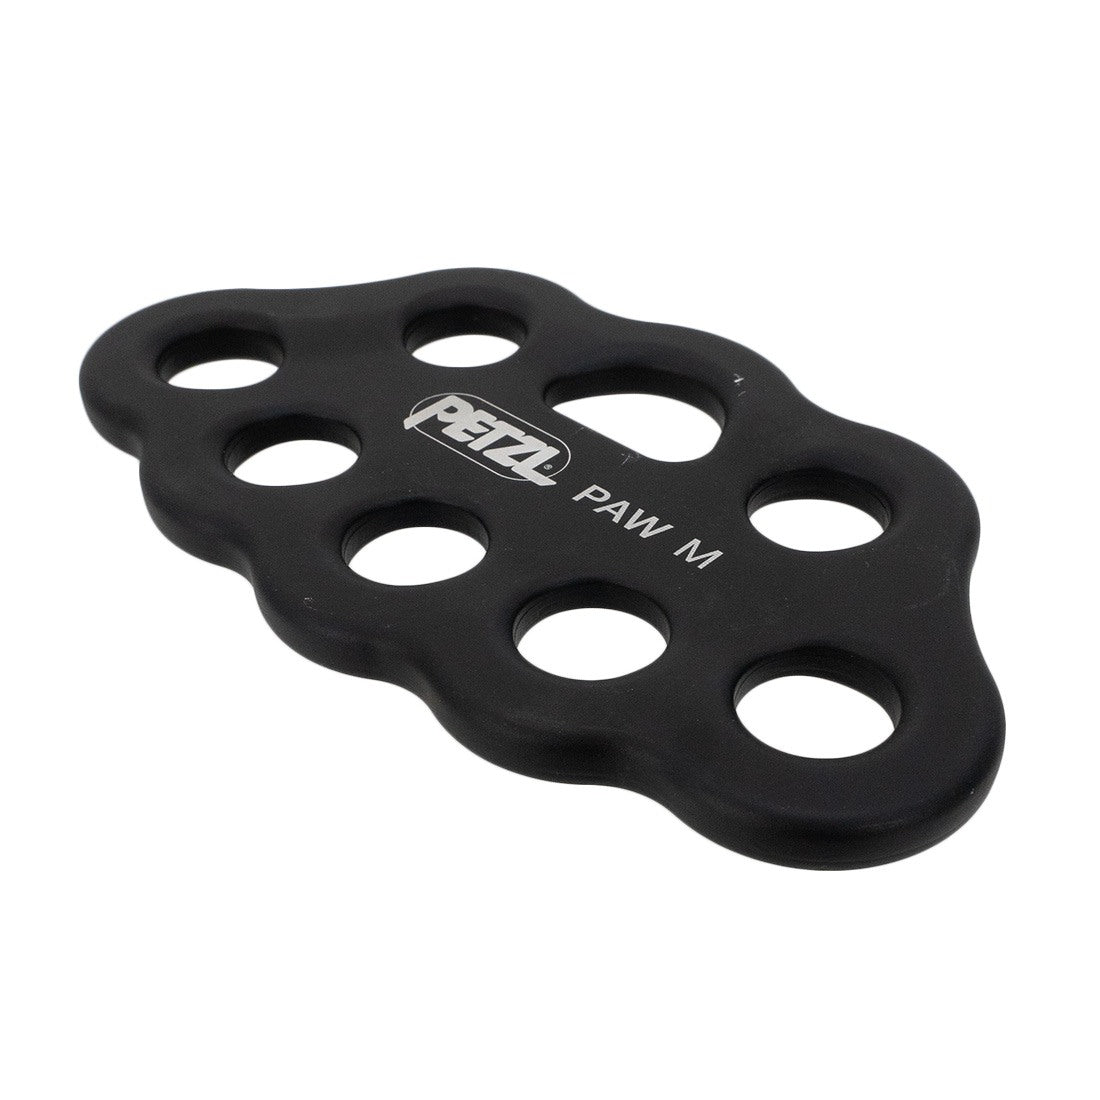 Petzl PAW Rigging Plate Side View